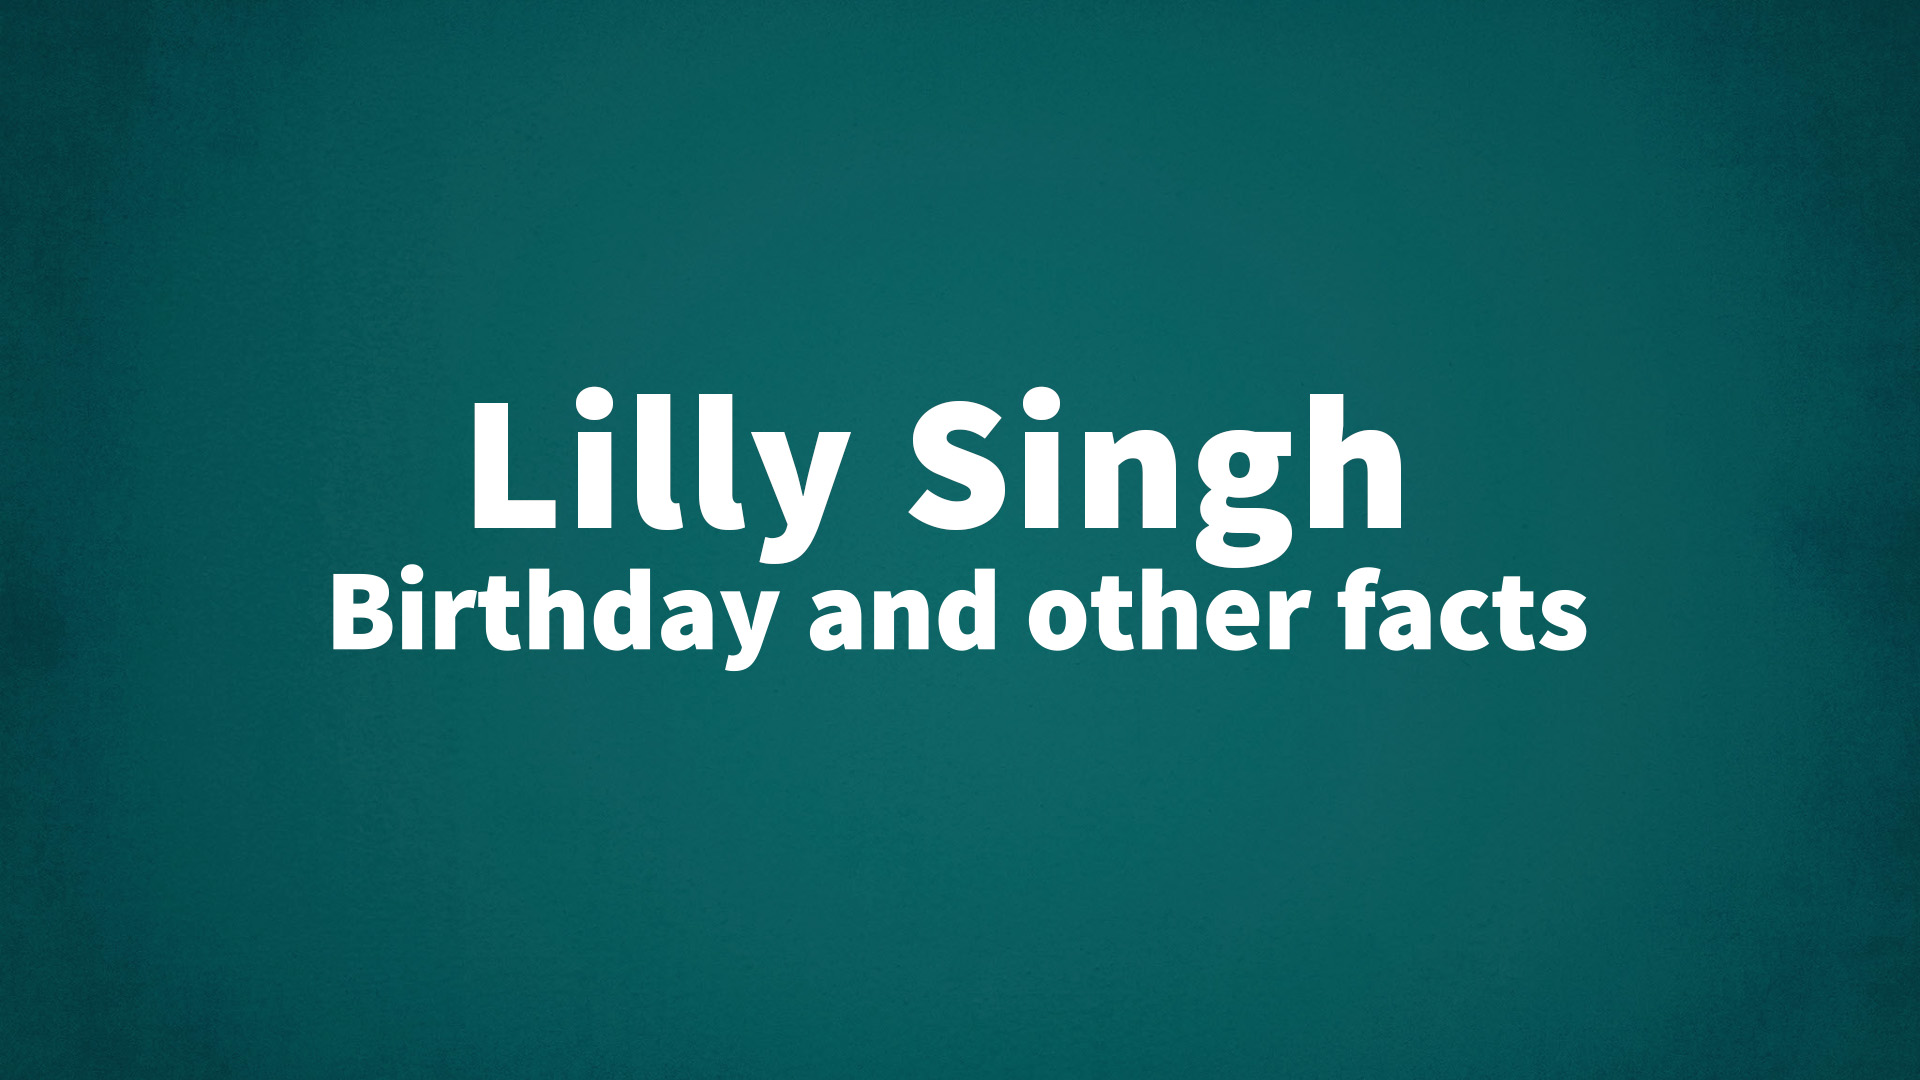 title image for Lilly Singh birthday